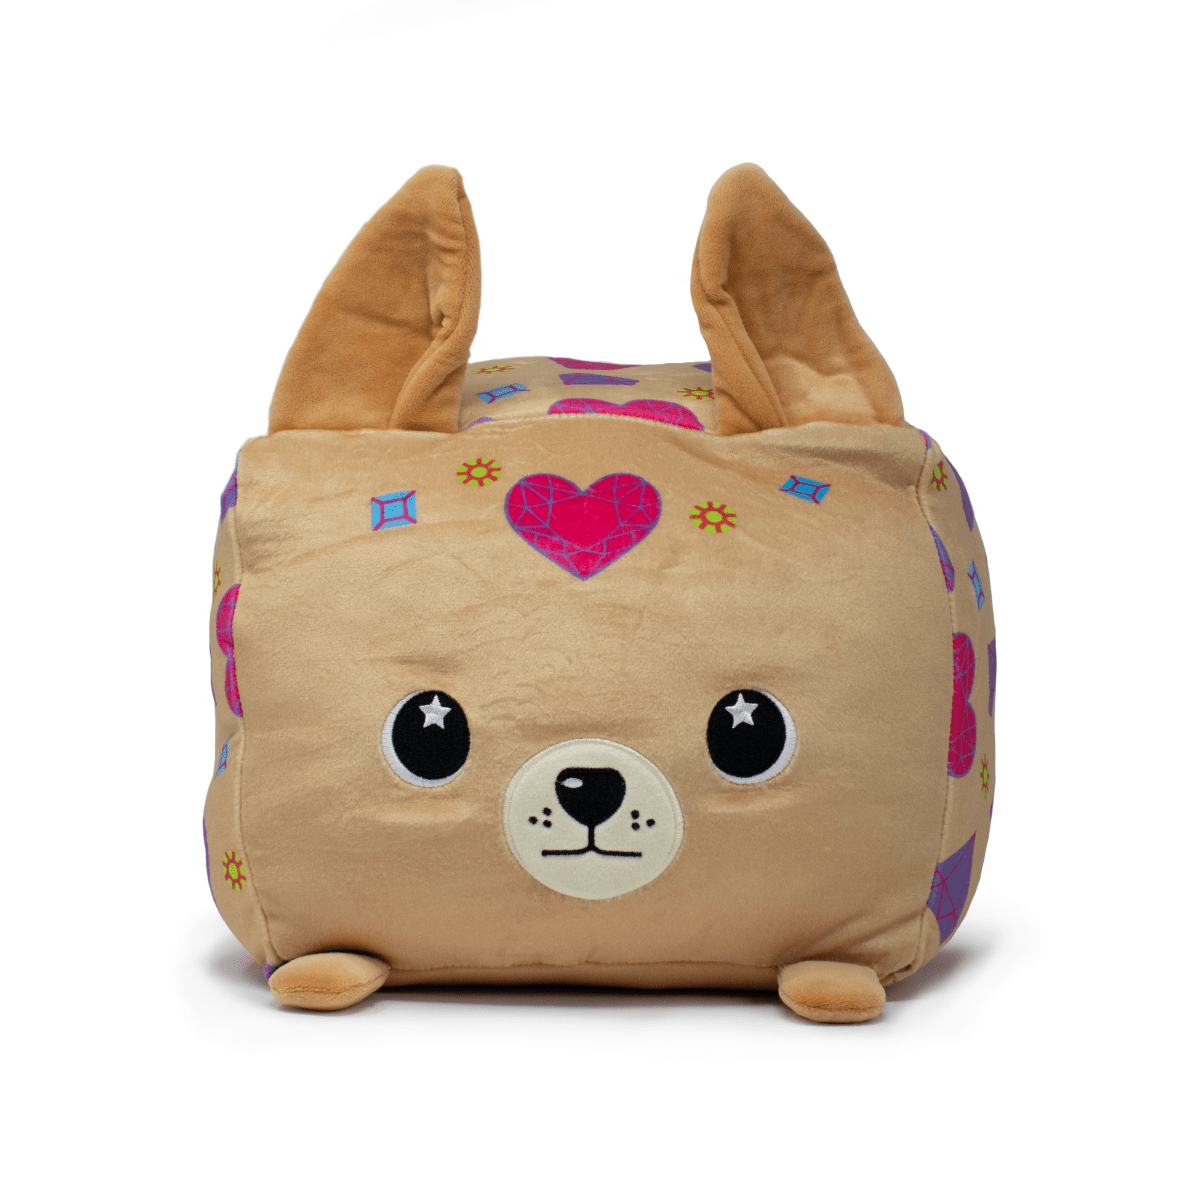 Bev the Chihuahua plush toy with heart-patterned fur and twinkling eyes from Moosh-Moosh SQUARED² Collection.